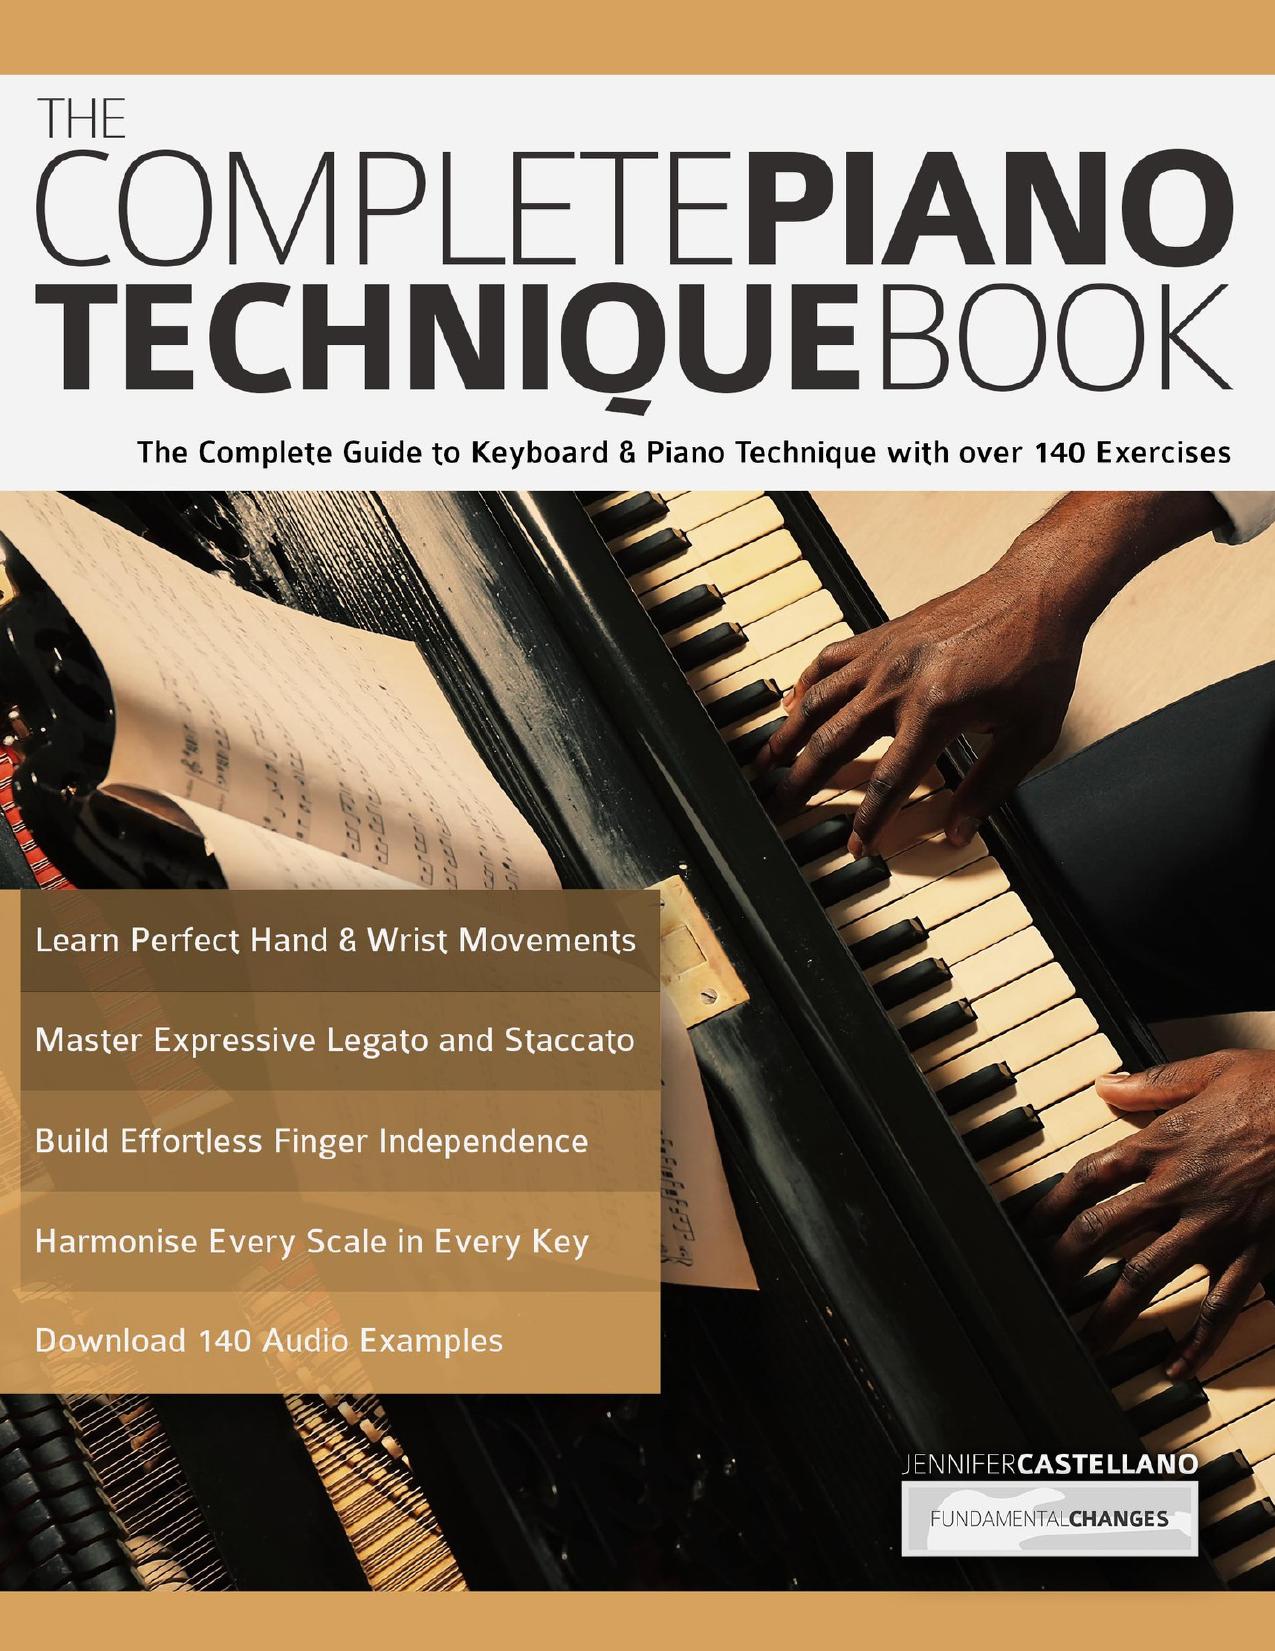 The Complete Piano Technique Book: The Complete Guide to Keyboard & Piano Technique with over 140 Exercises by Alexander Joseph & Castellano Jennifer